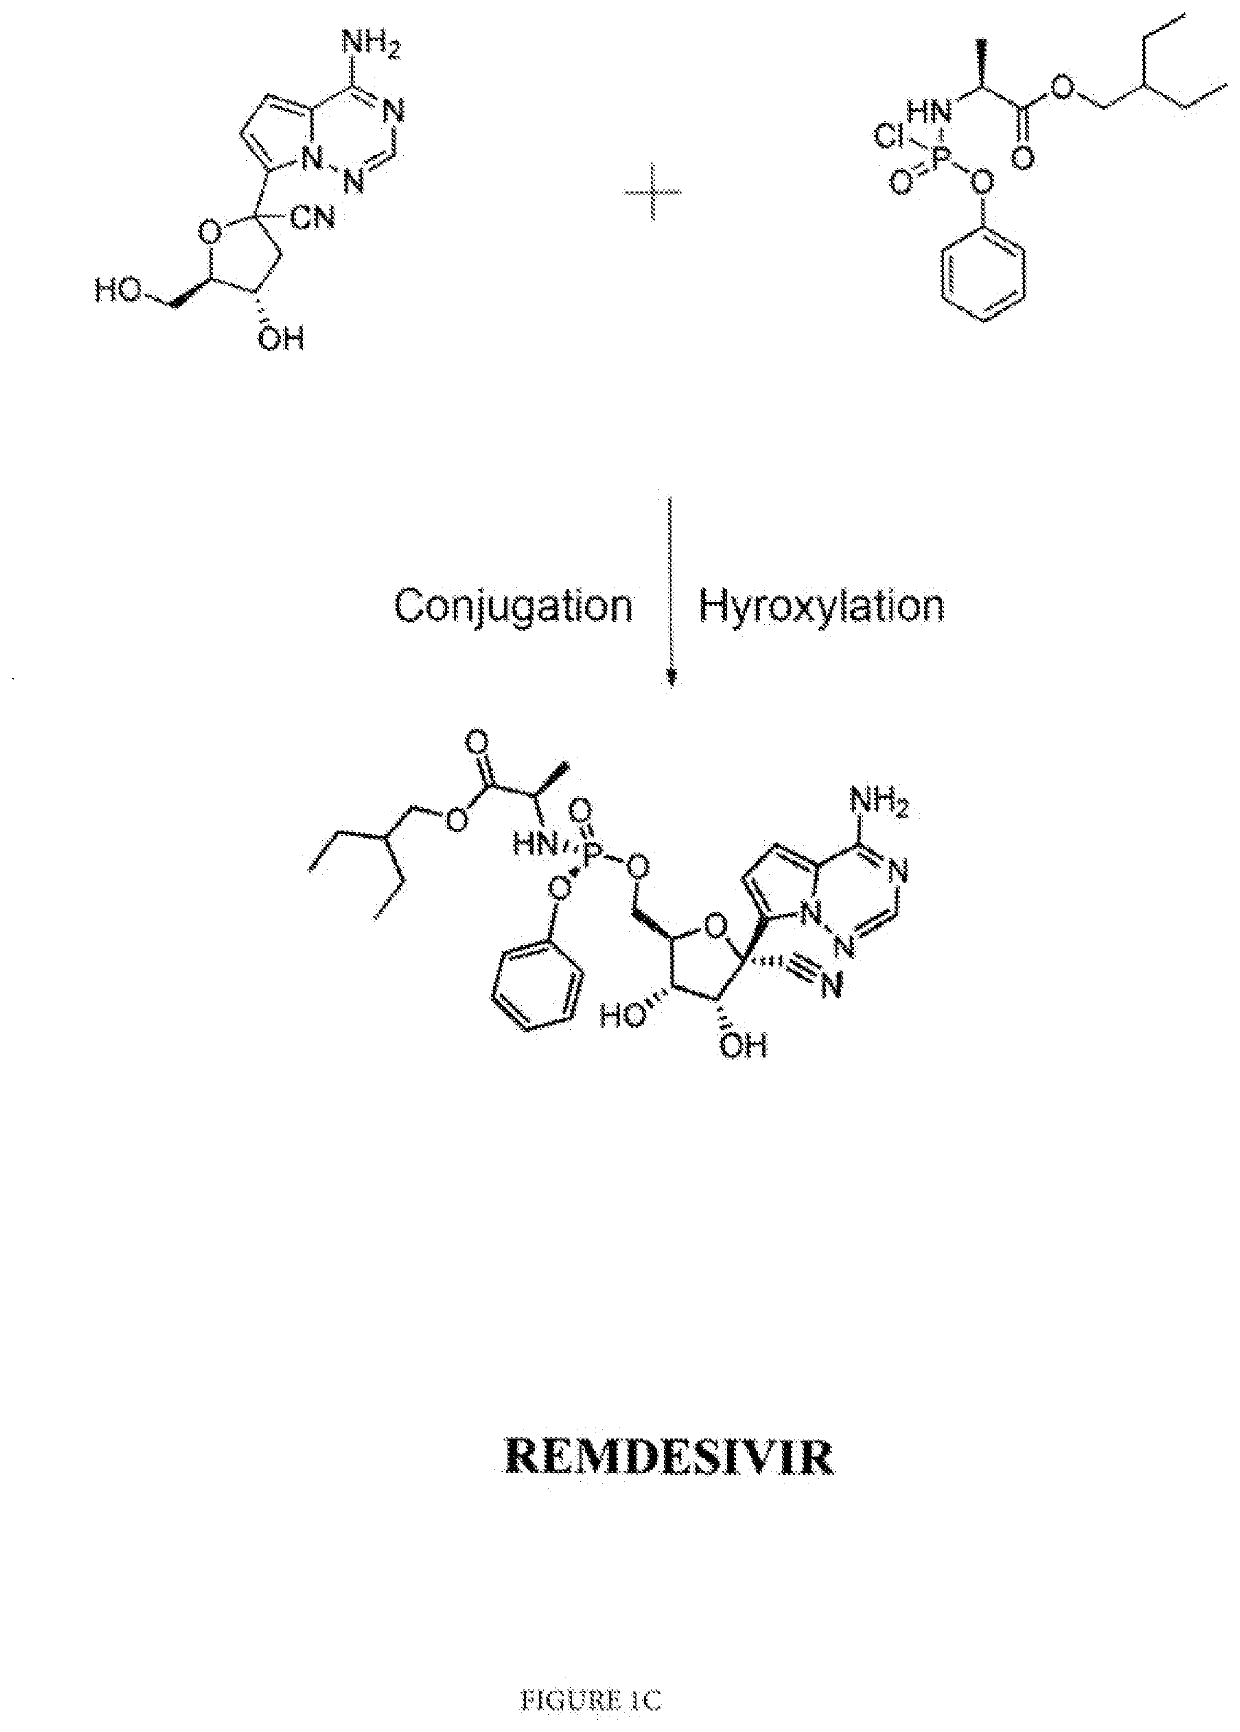 Isomorphs of remdesivir and methods for synthesis of same